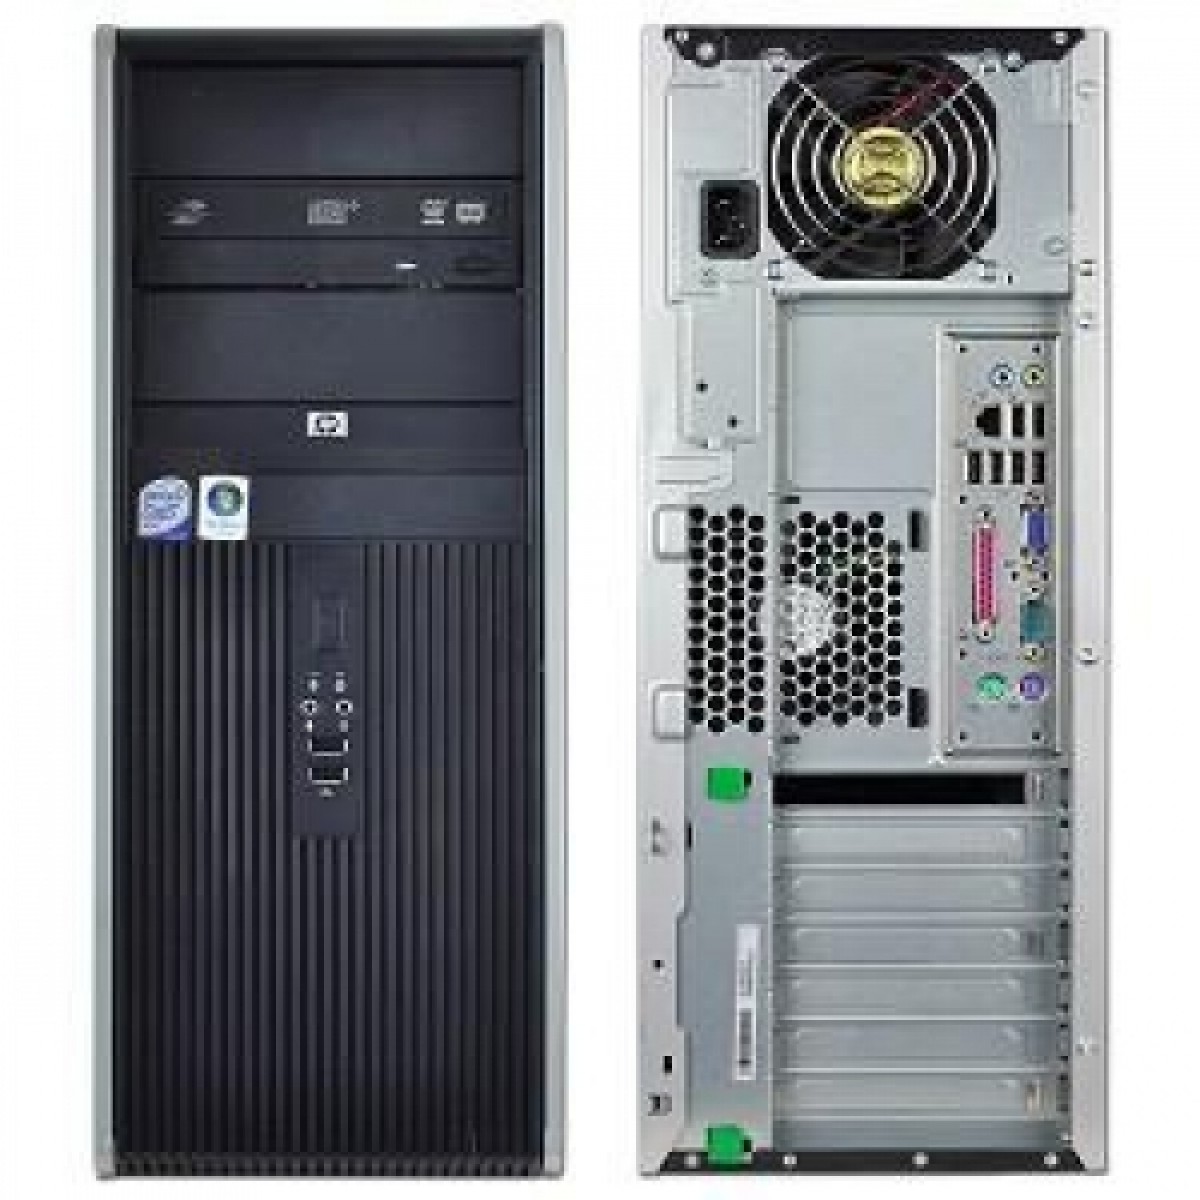 Hp dc7800 cmt pc all drivers